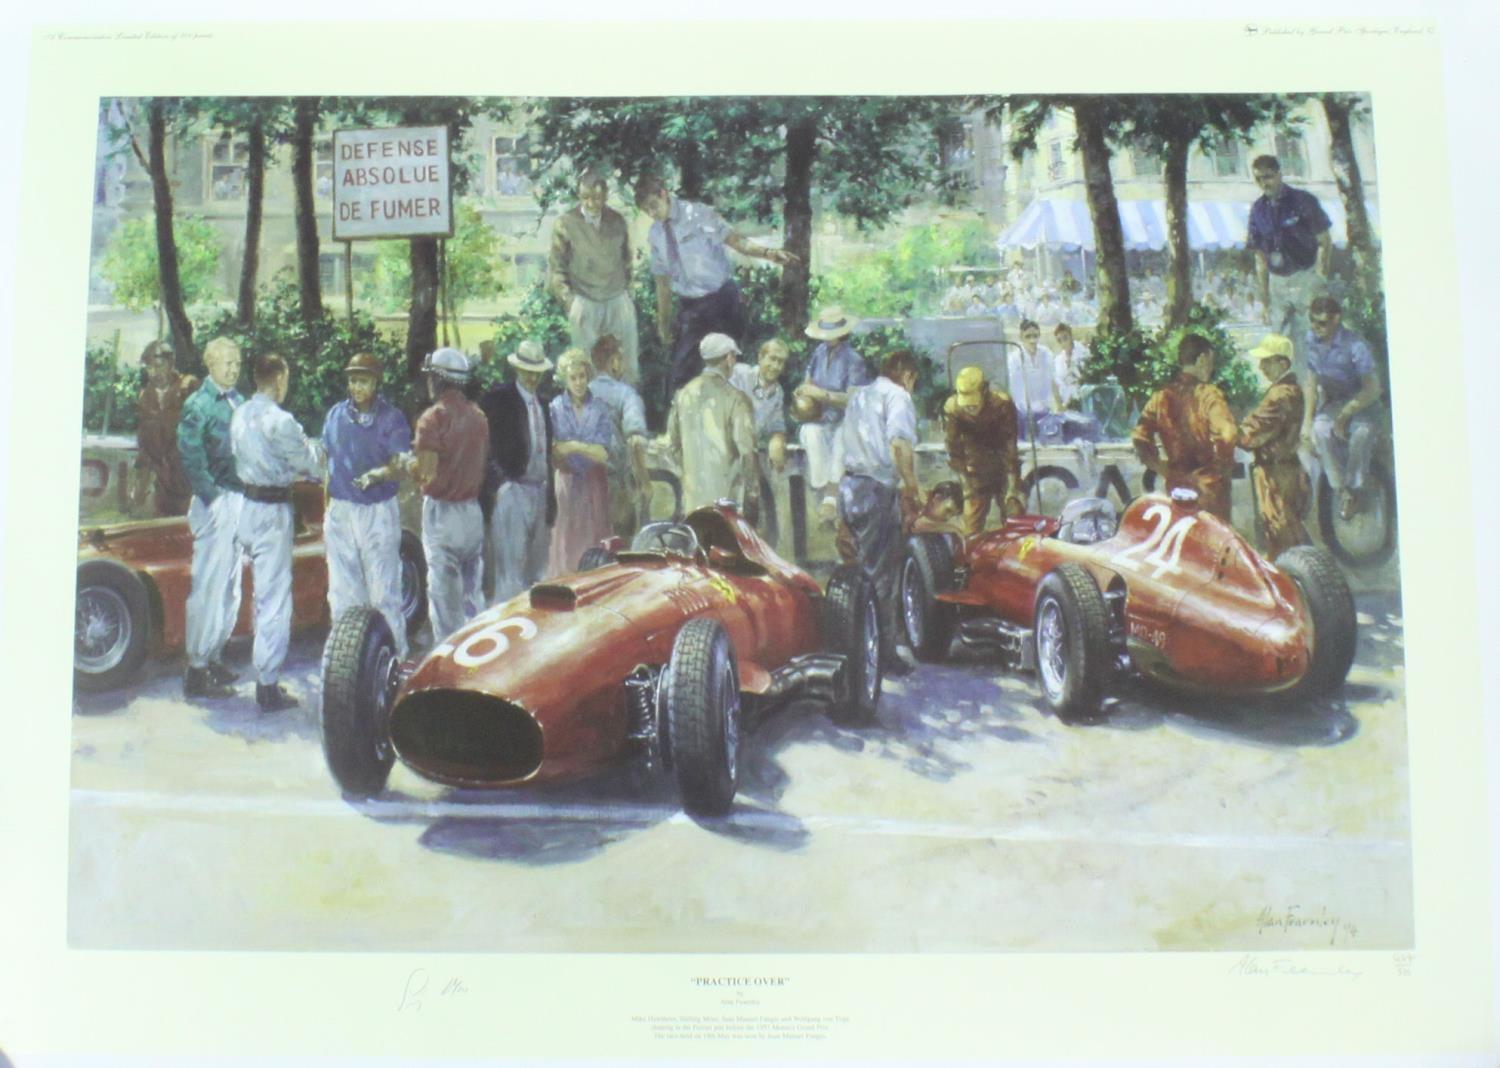 Motor Racing Interest: After Alan Fearnley, 'Practice Over' sign by artist and Stirling Moss, and '